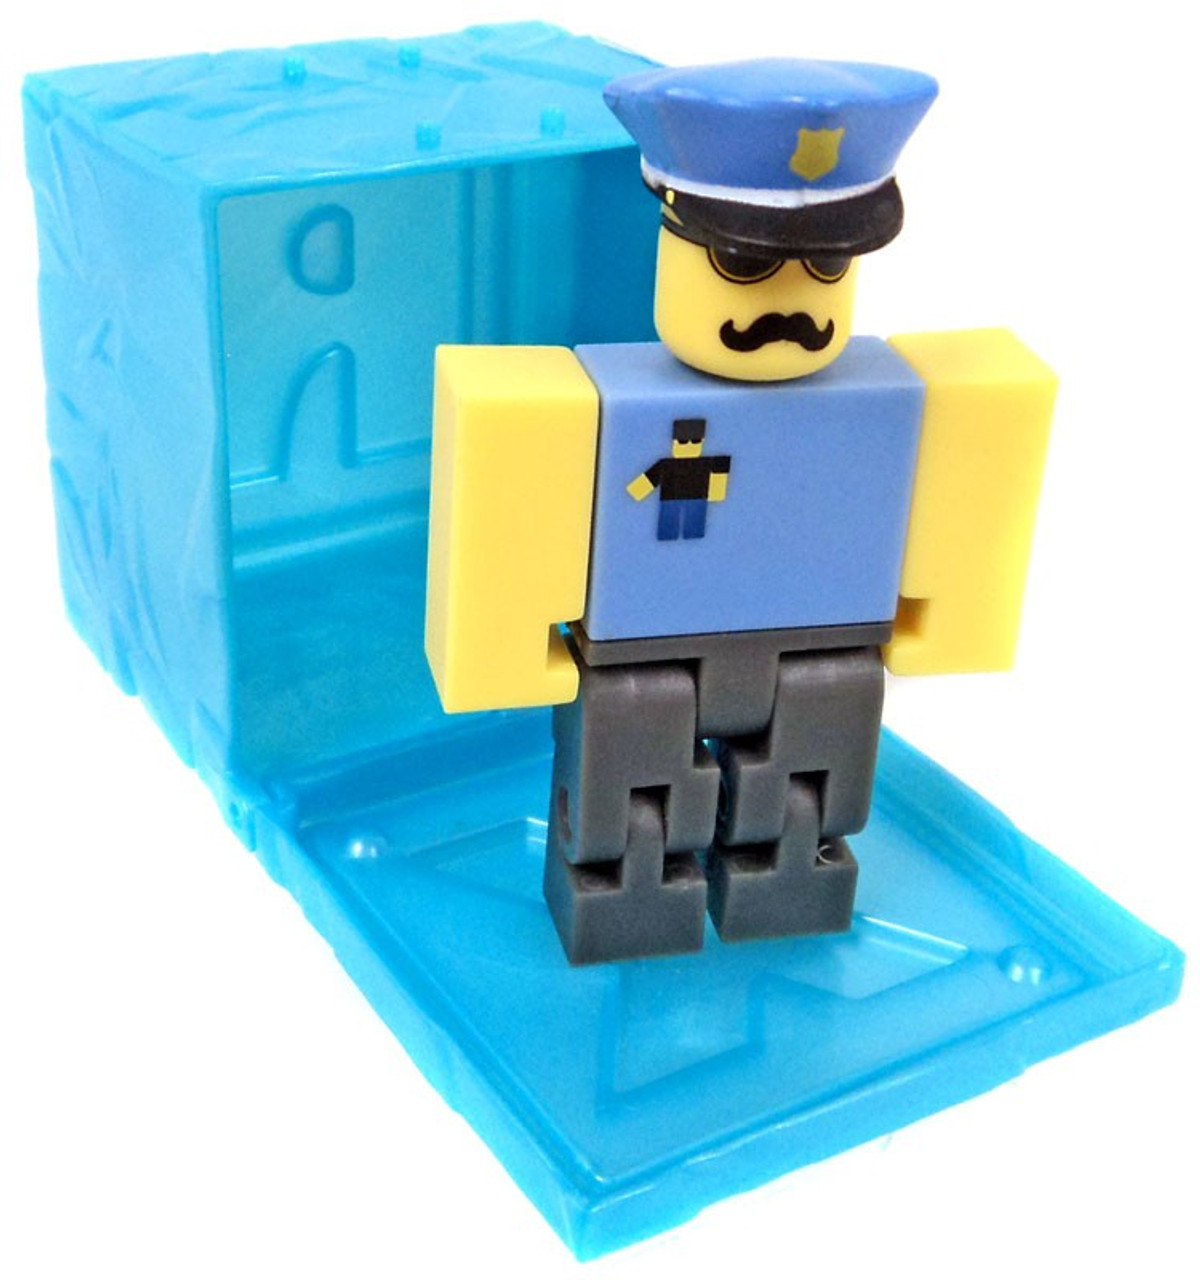 Roblox Series 3 A Normal Elevator Doorman W Code Code Only Available - roblox in real life normal elevator 3